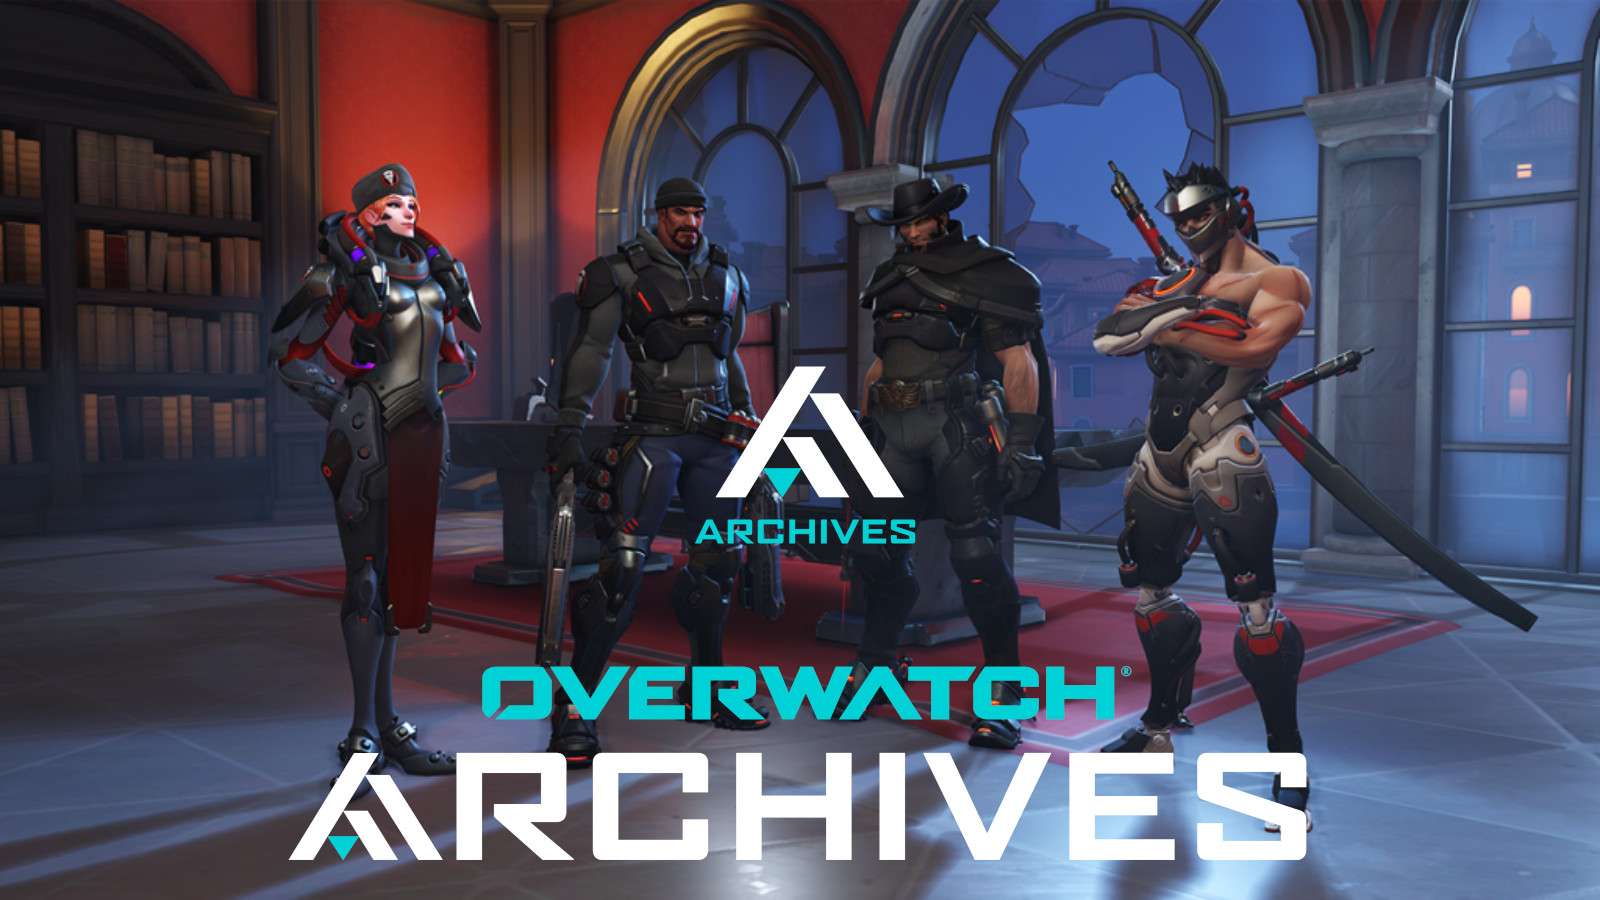 Overwatch archives event 2021